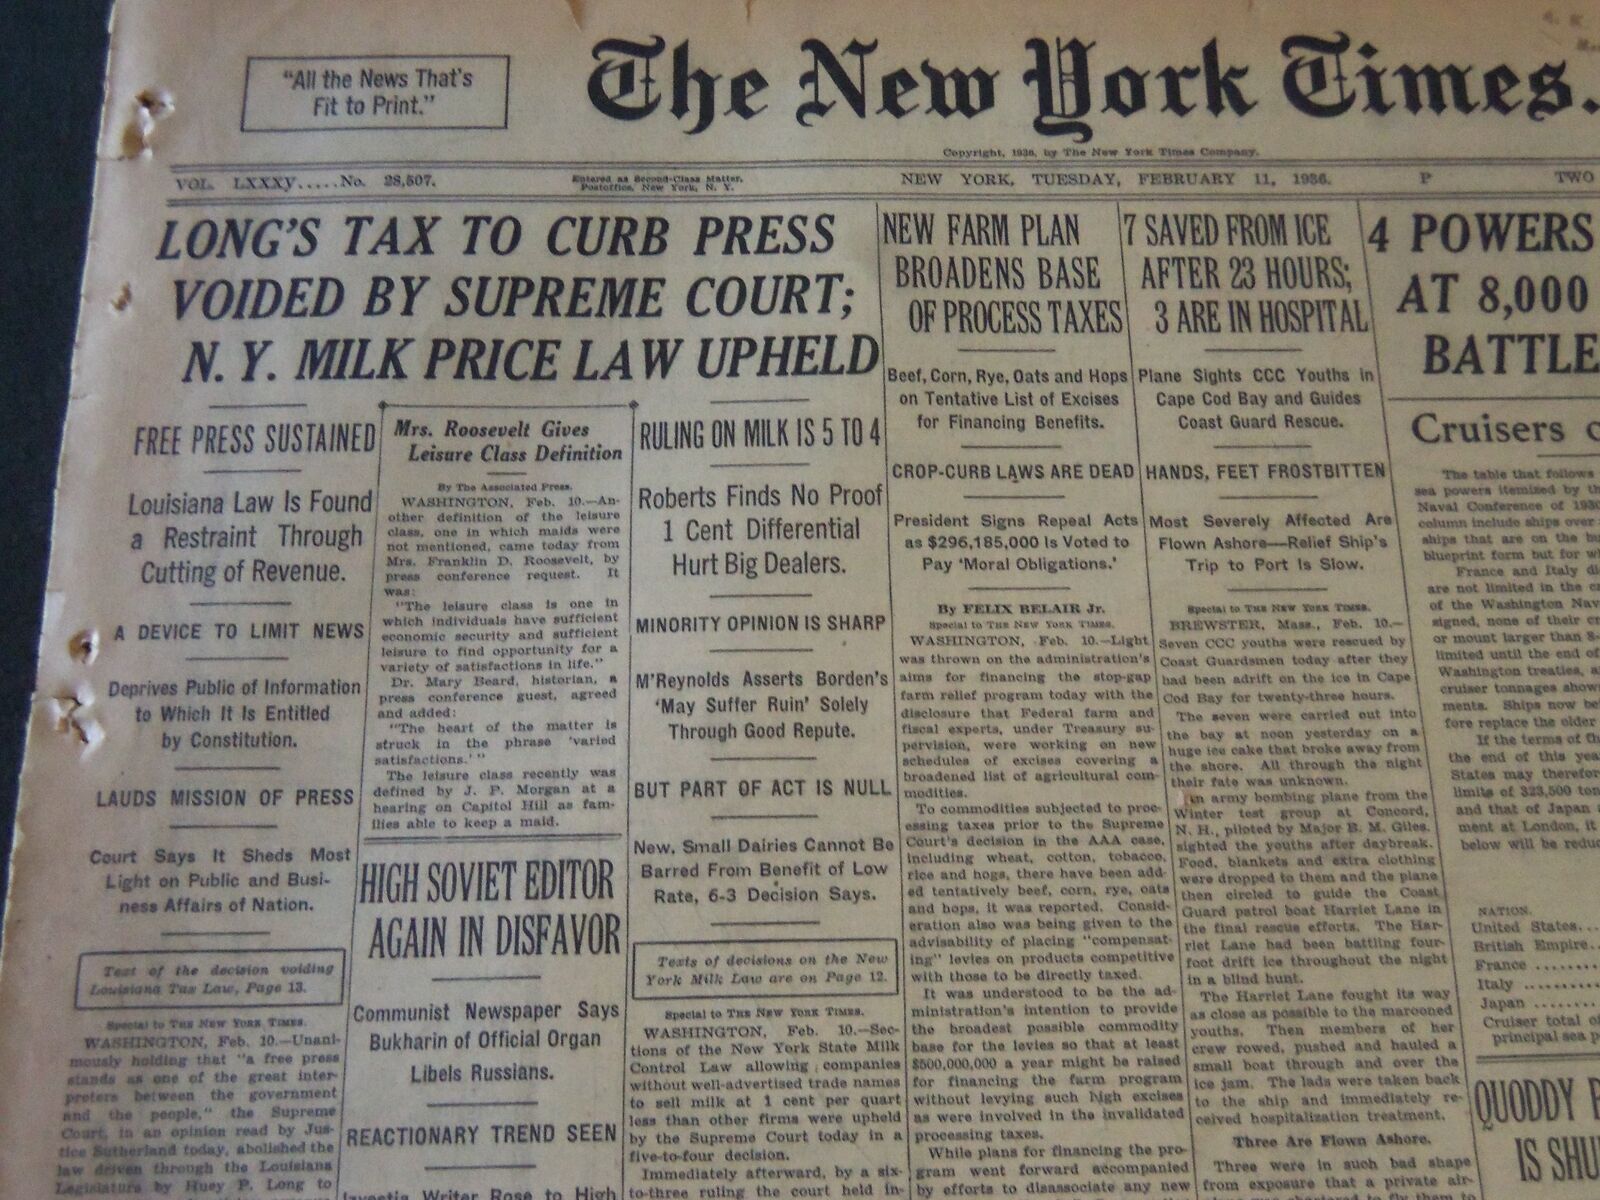 1936 FEB 11 NEW YORK TIMES - LONG'S TAX TO CURB PRESS VOIDED BY COURT - NT 6714